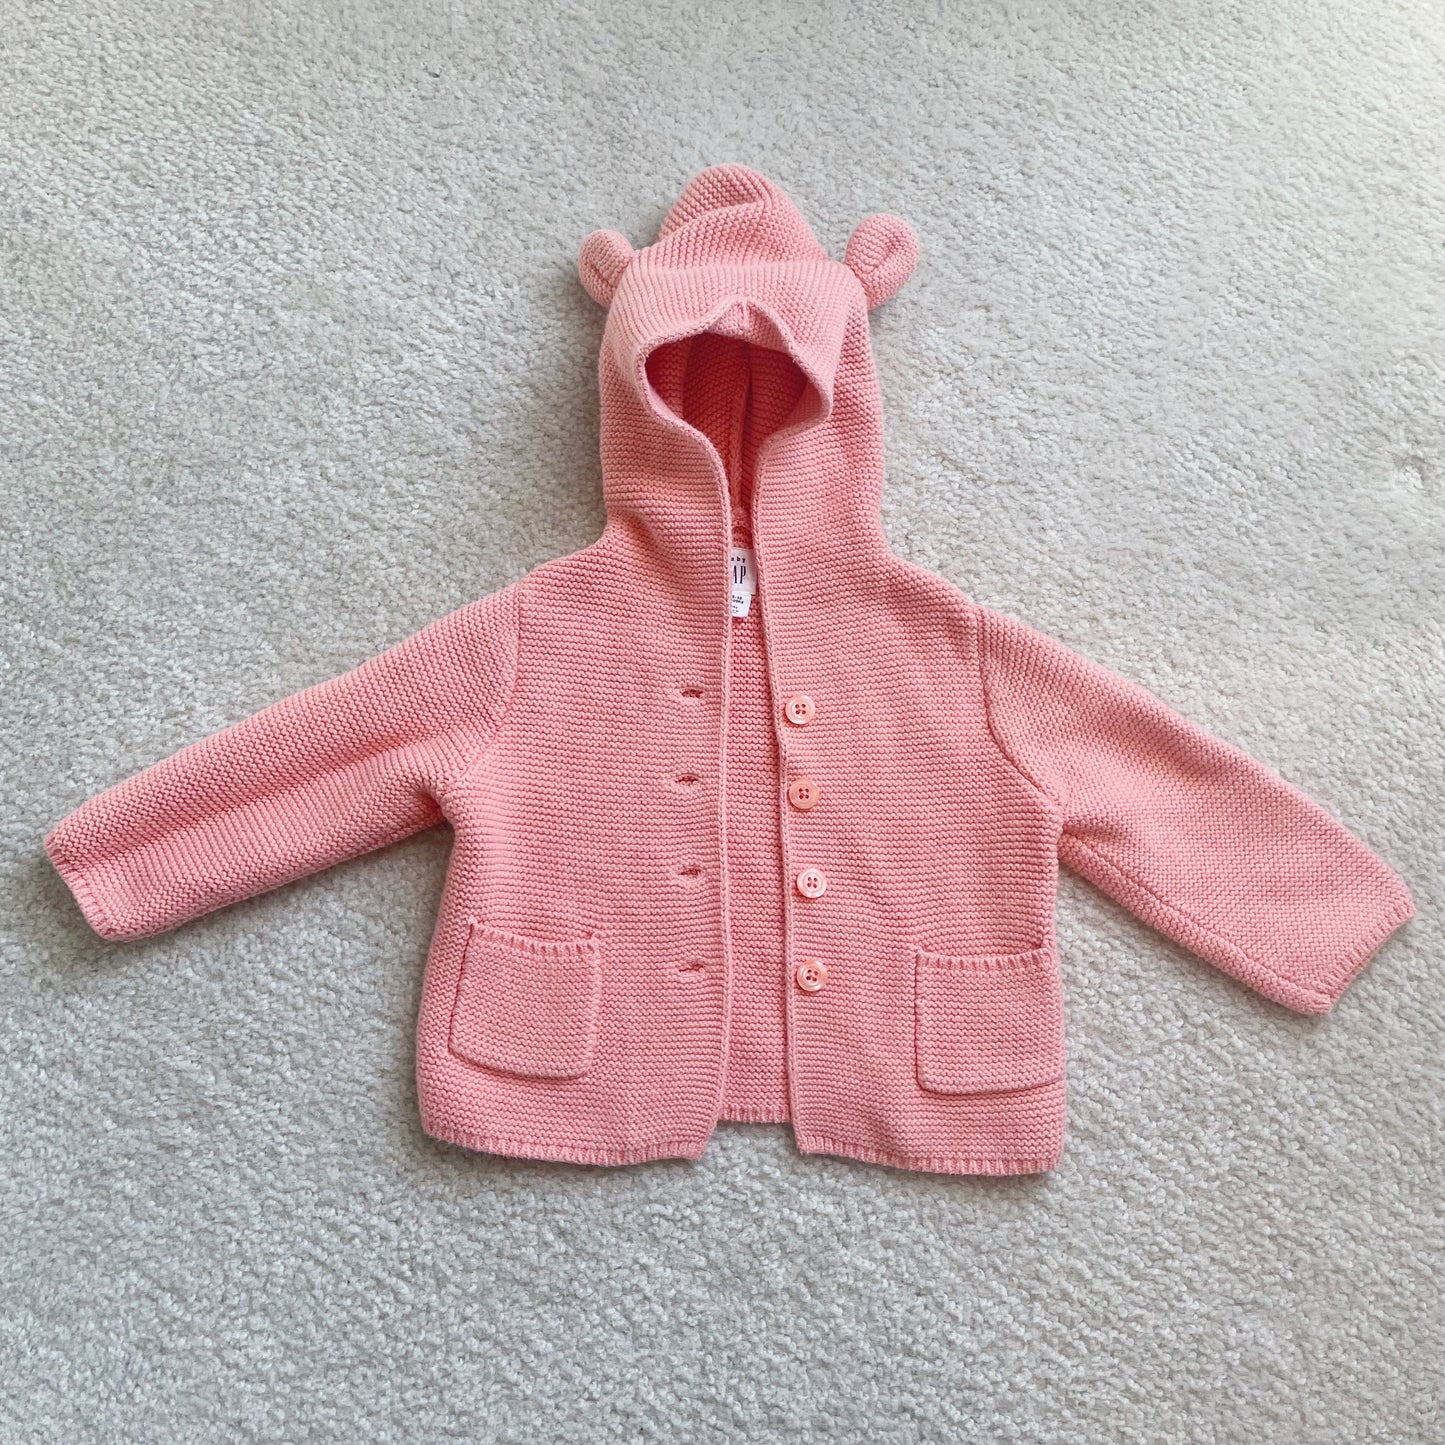 Girls Size 12-18 Months Gap Knit Hooded Sweater with Ears